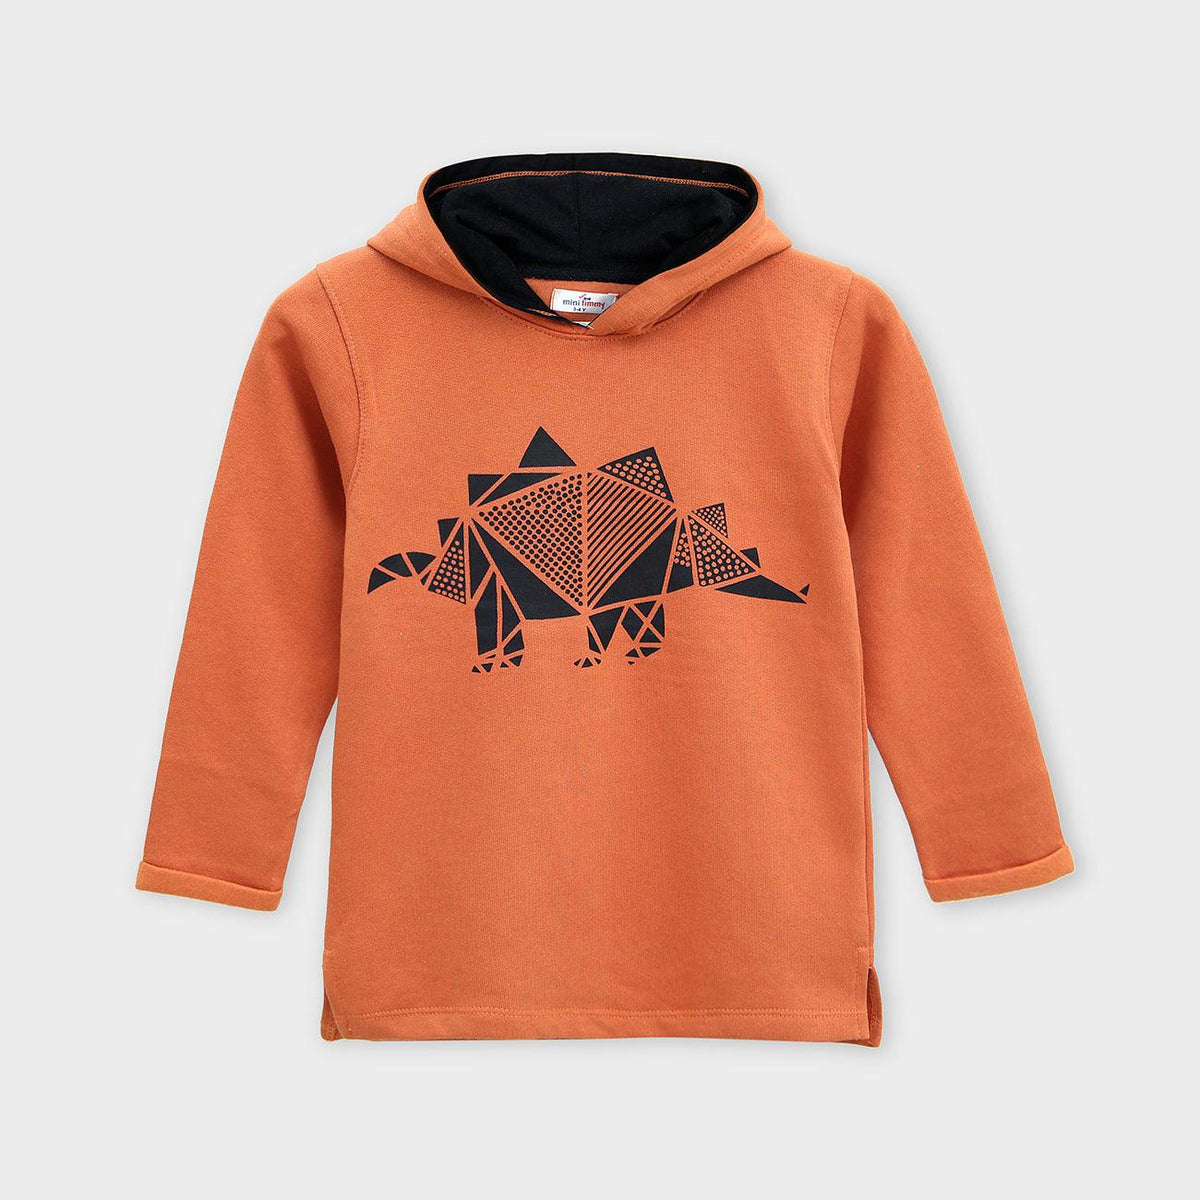 Premium Quality Pull-Over Printed Fleece Hoodie For Boys (MD-000027) - Brands River